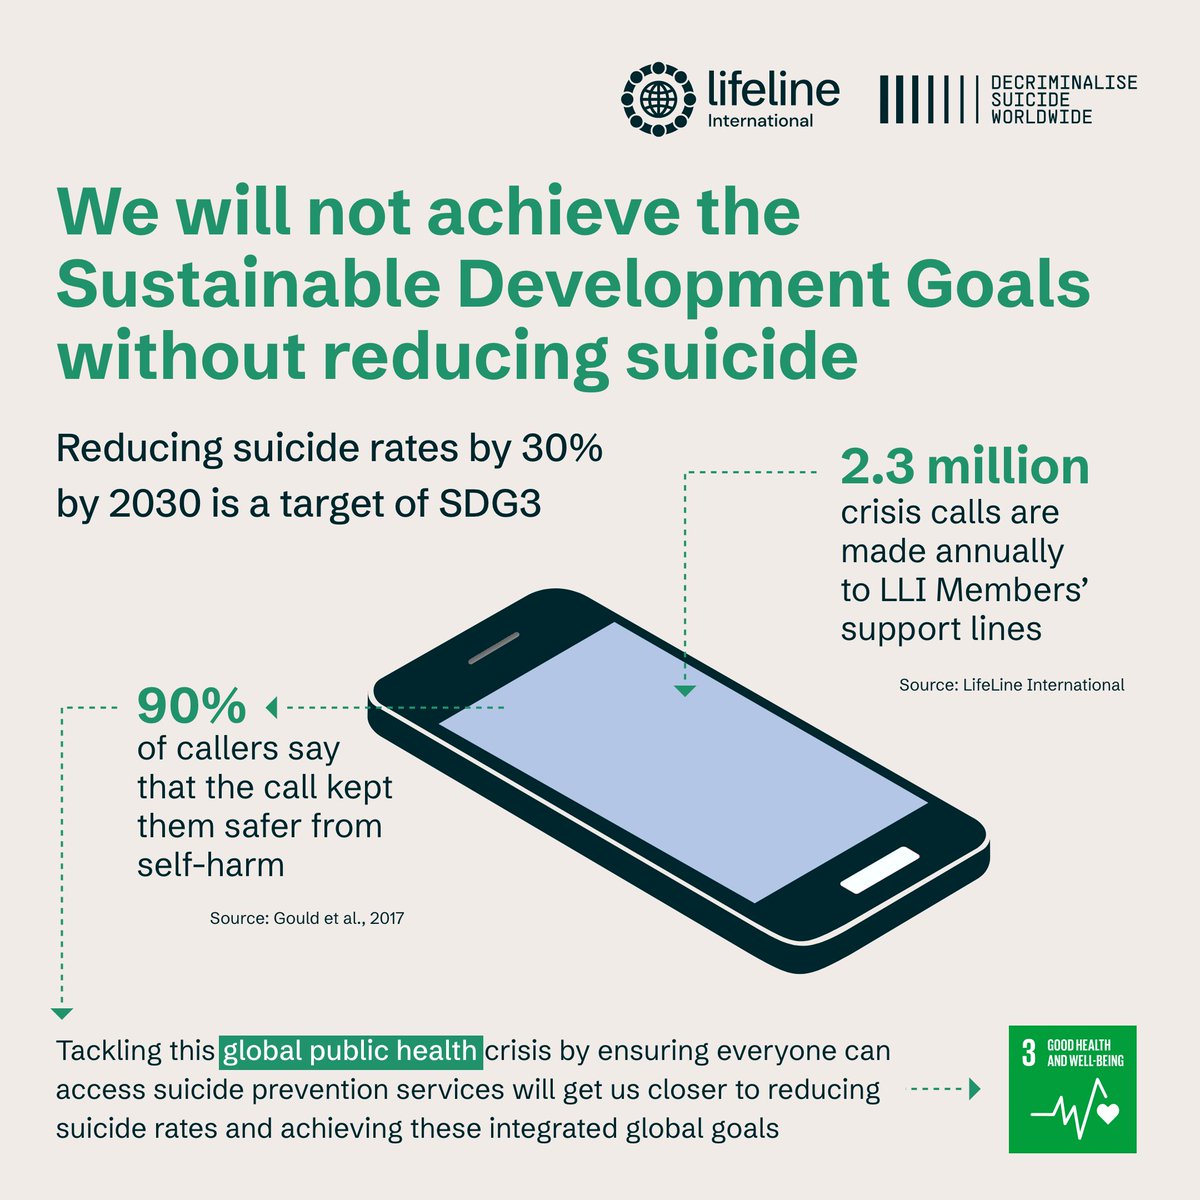 DYK suicide is a global public health crisis?

Crisis support lines reduce suicide rates and can help reach the @UN's 2030 Sustainable Development Goals

With 6 years left, NOW is the time to Decriminalise Suicide Worldwide
suicide-decrim.network

#DecriminaliseSuicideWorldwide